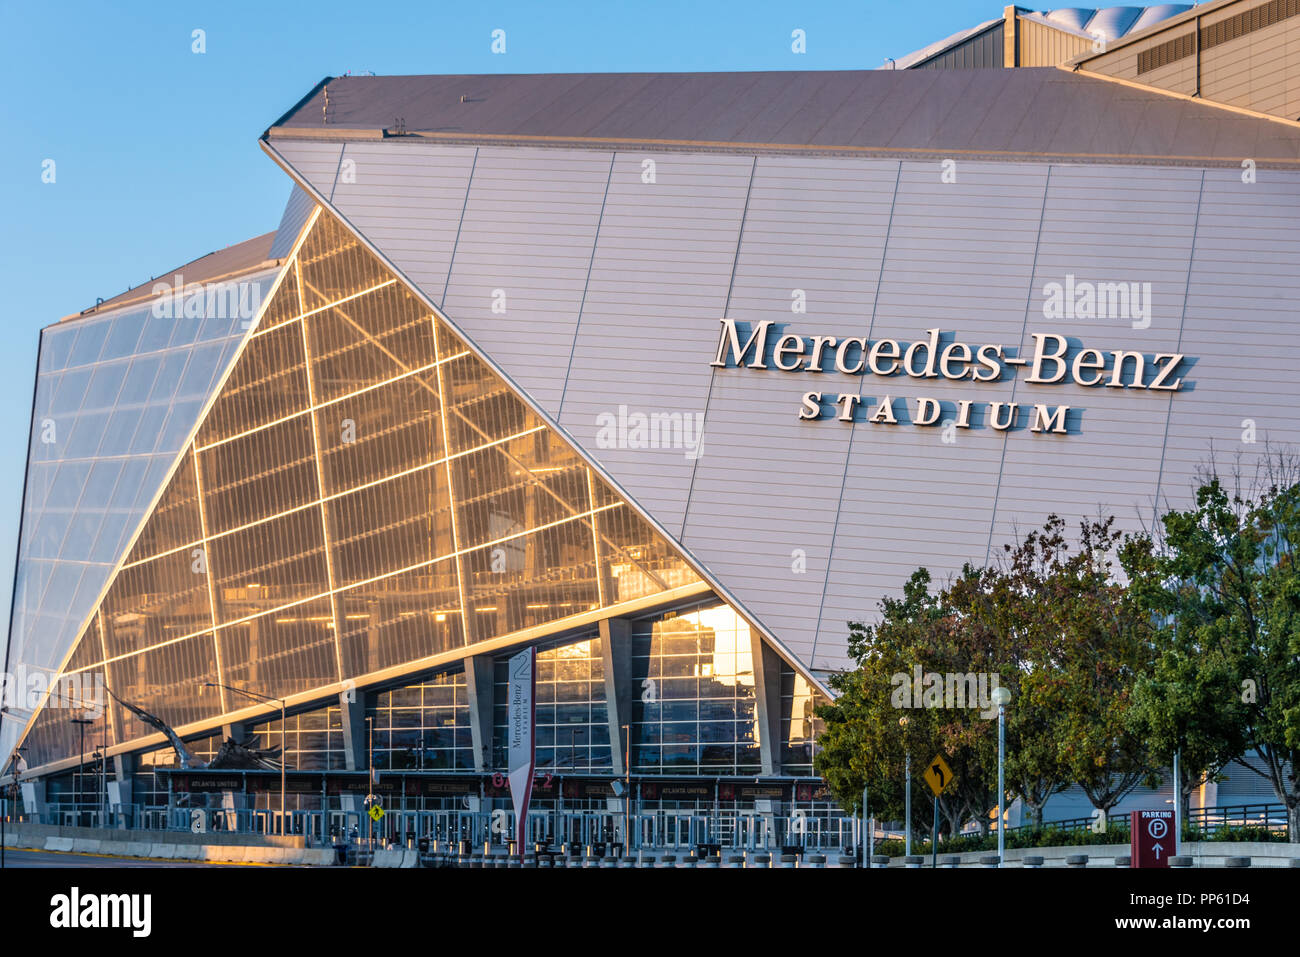 Mercedes-Benz Stadium (host of Super Bowl 2019) in downtown Atlanta, GA is home to the NFL's Atlanta Falcons and the MLS's Atlanta United FC. (USA) Stock Photo